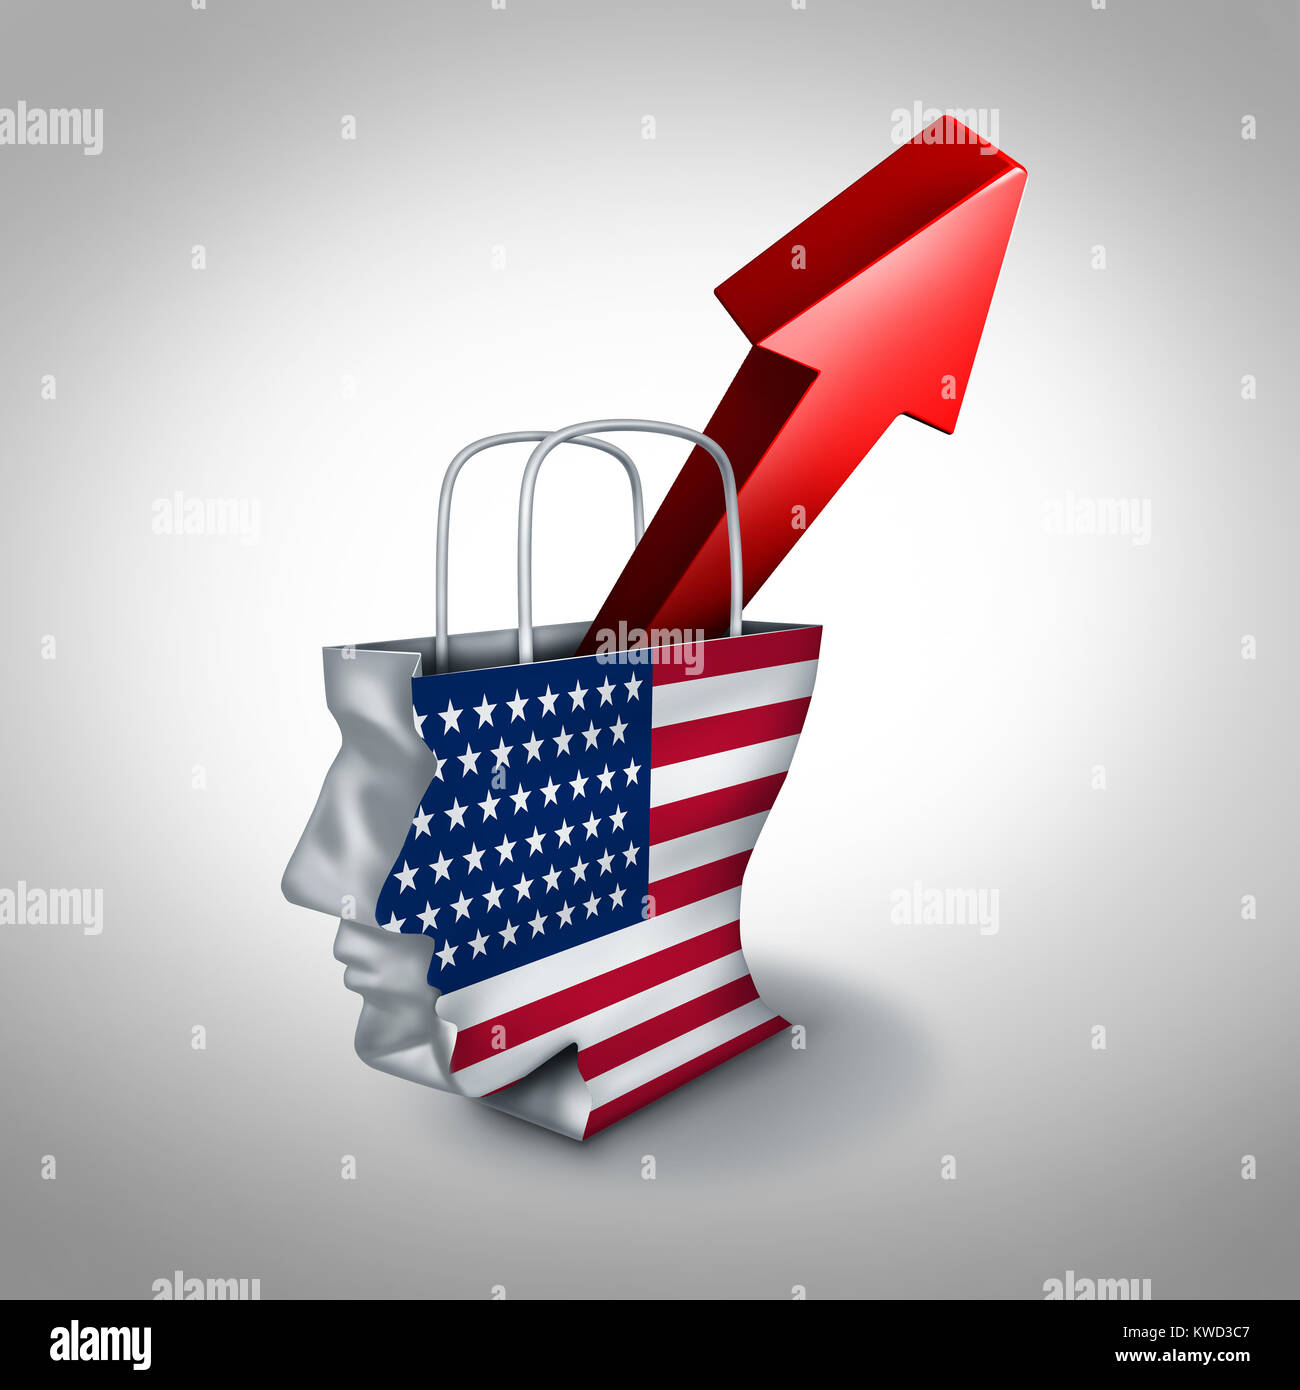 United States consumer confidence rise in a rising American market of goods and services and surging success of US retail industry. Stock Photo